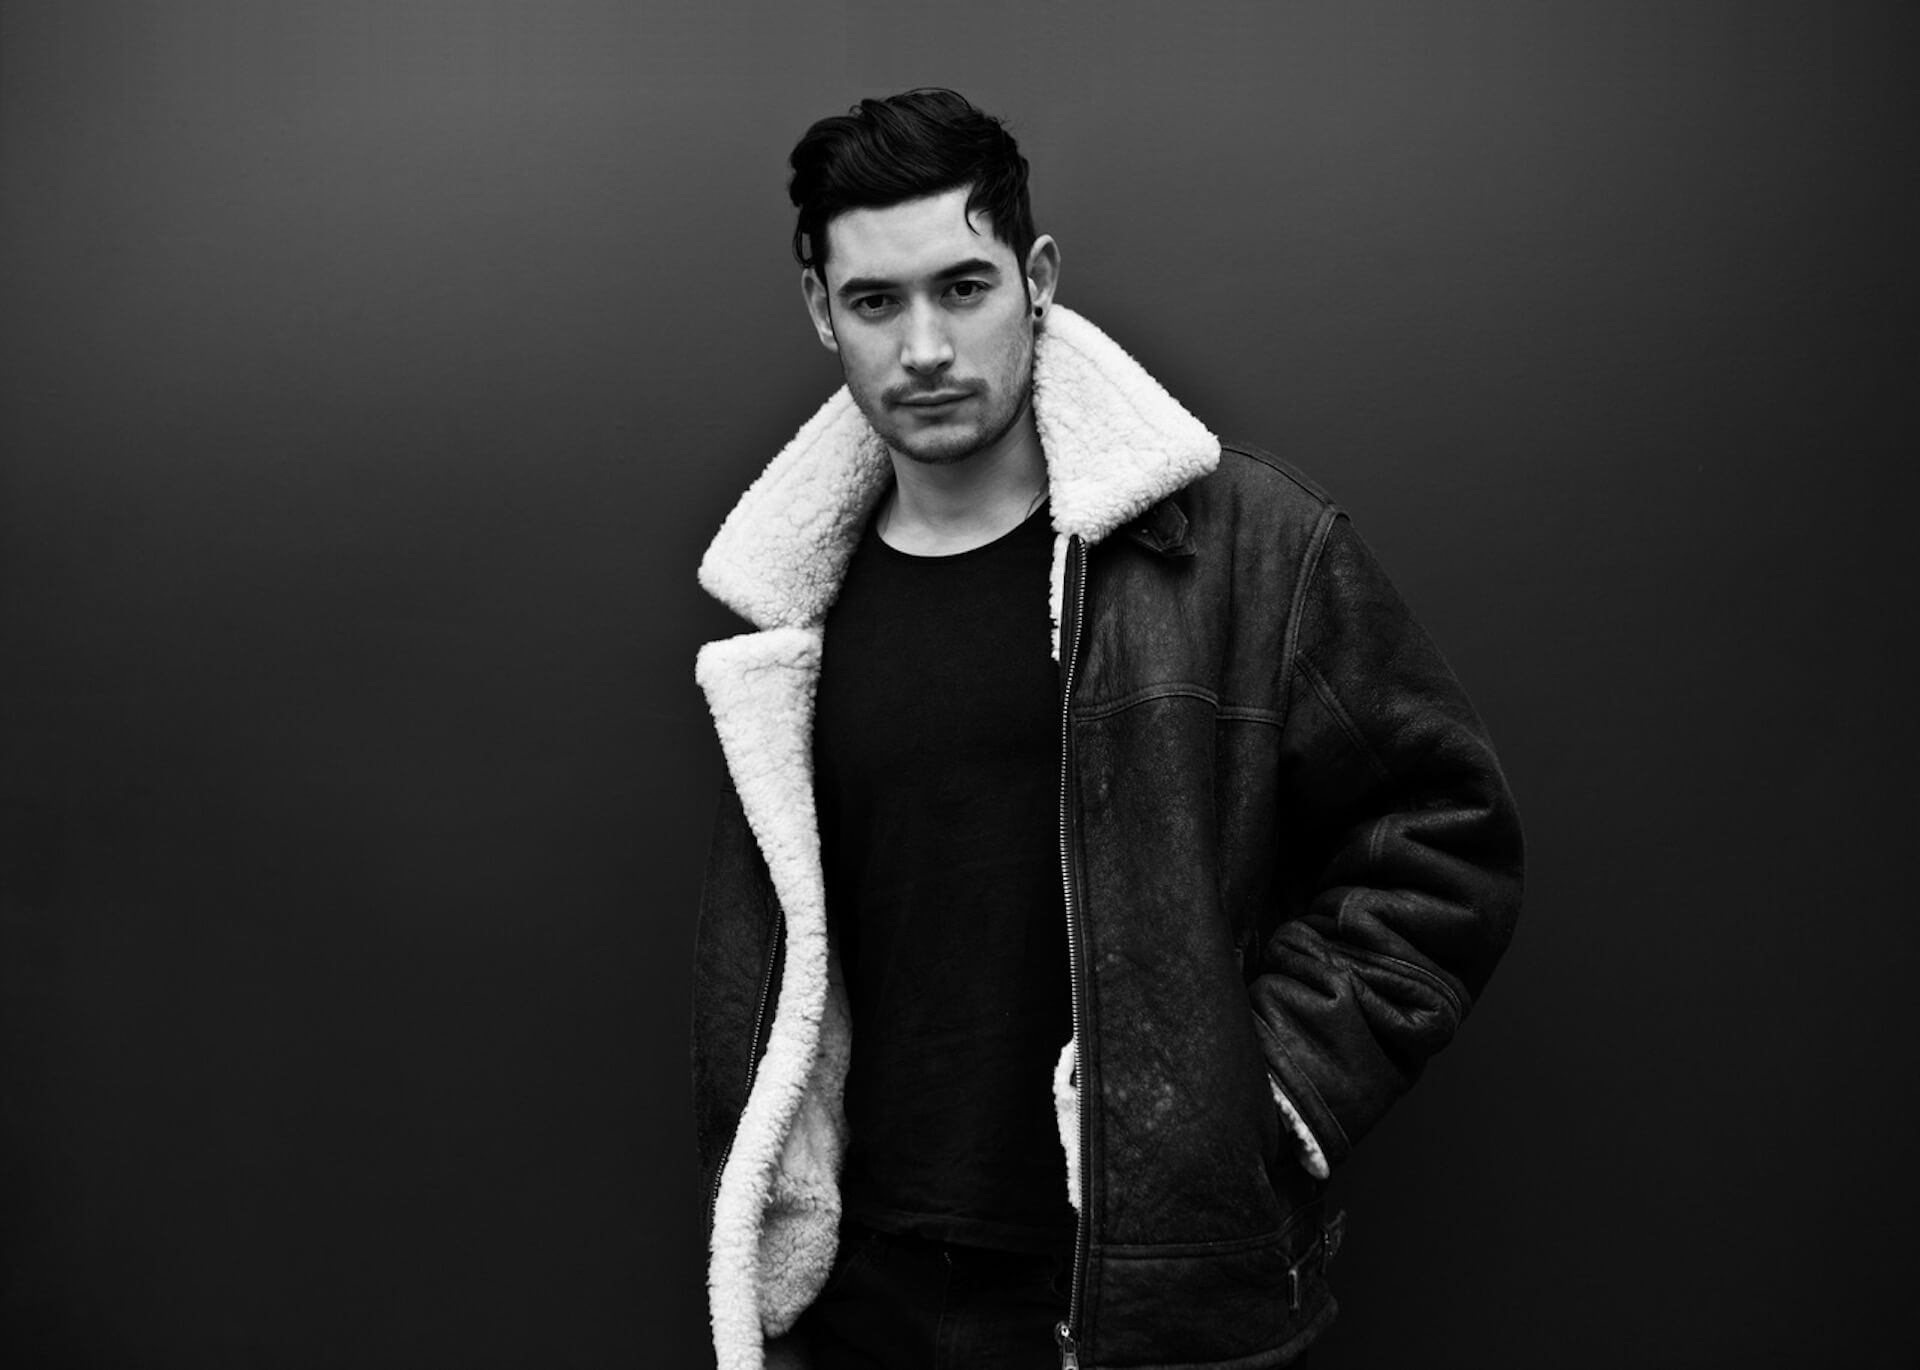 ALIVE presents REBOOT feat. DAX J & Conductor feat. Floyd Lavine & Hyenah